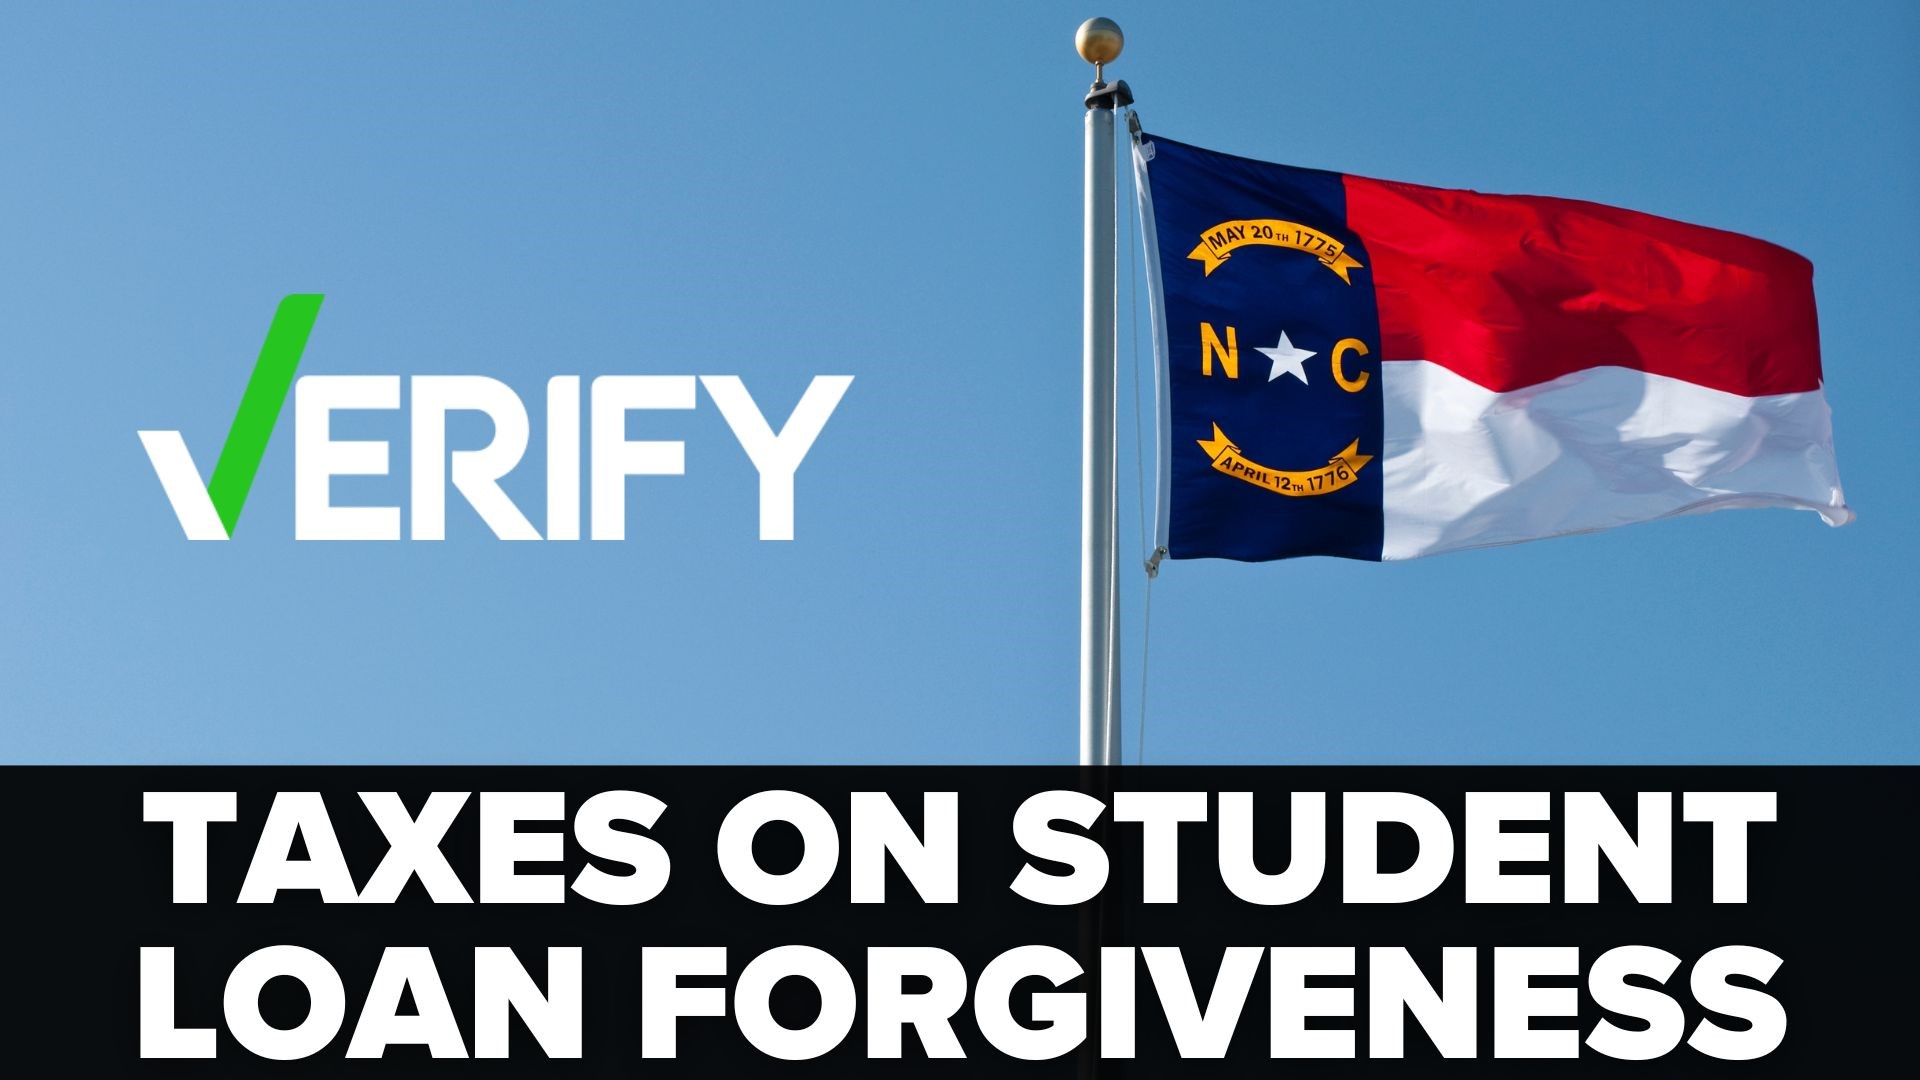 North Carolina is one of 13 states poised to tax student loan forgiveness, but Gov. Roy Cooper is calling on lawmakers to waive that income tax.